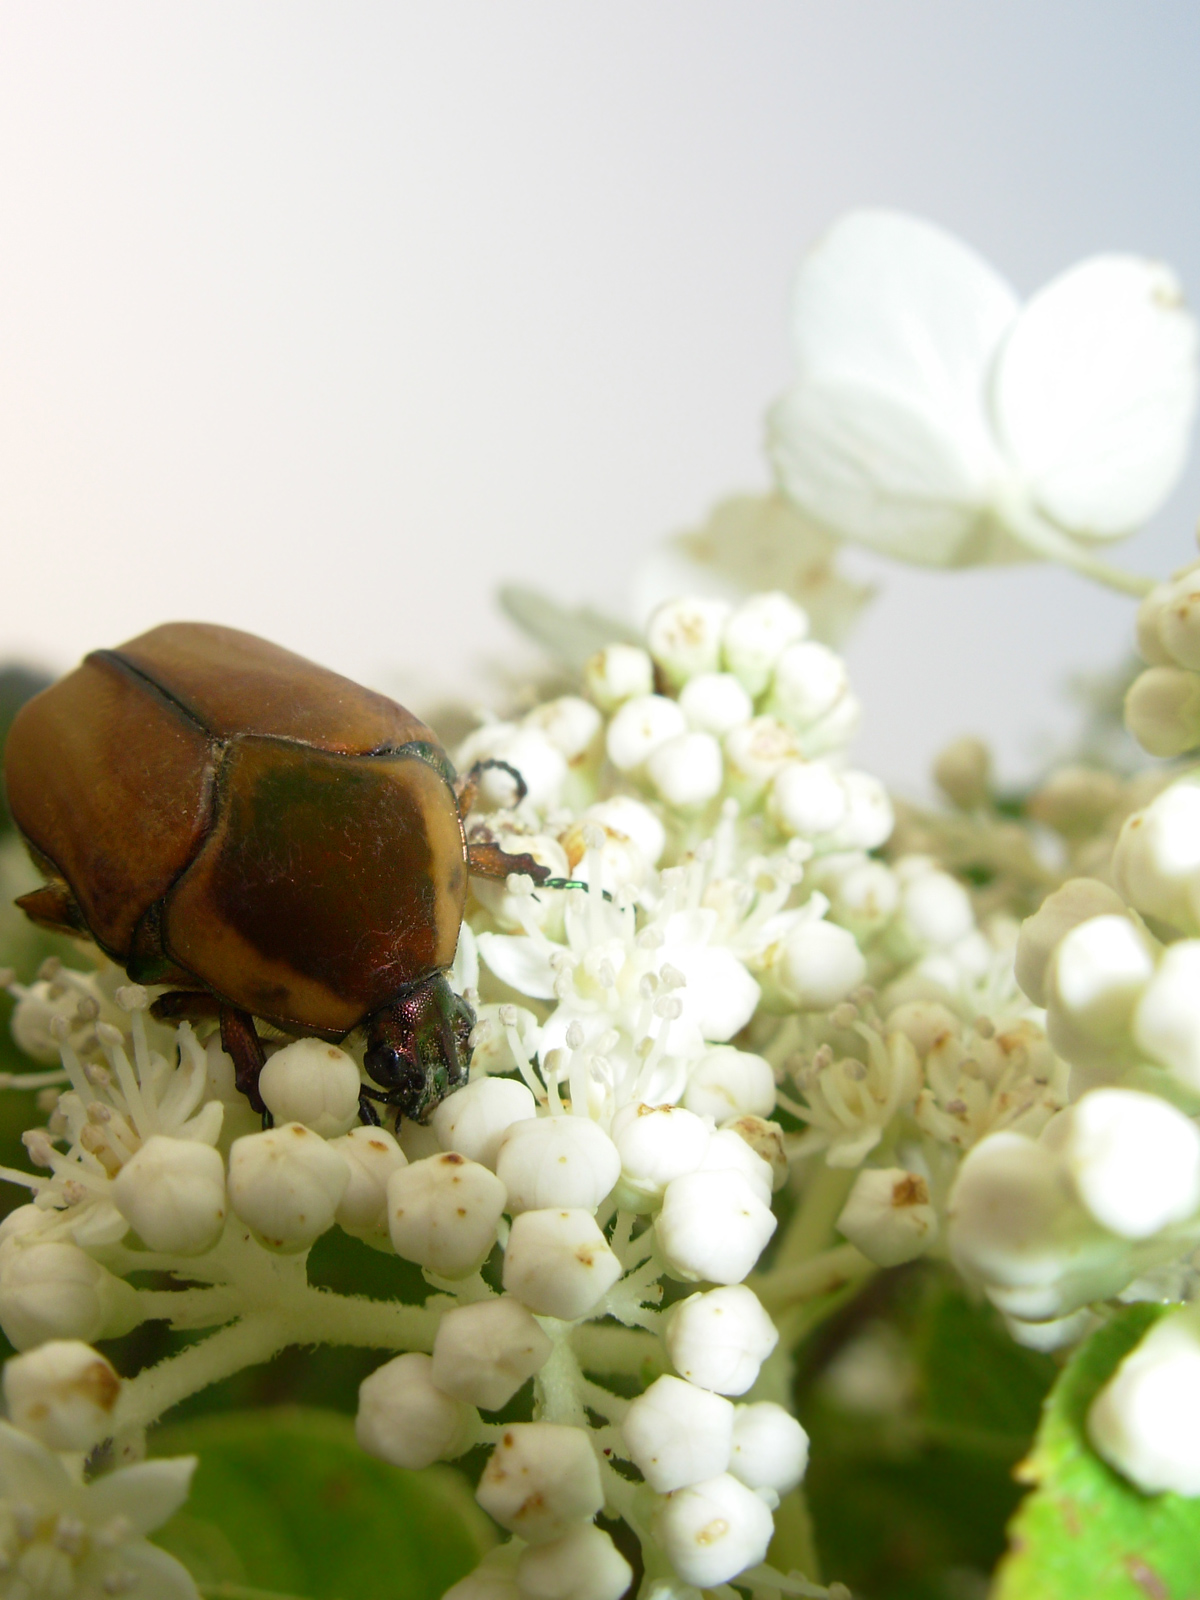 Beatle eating a flower photo